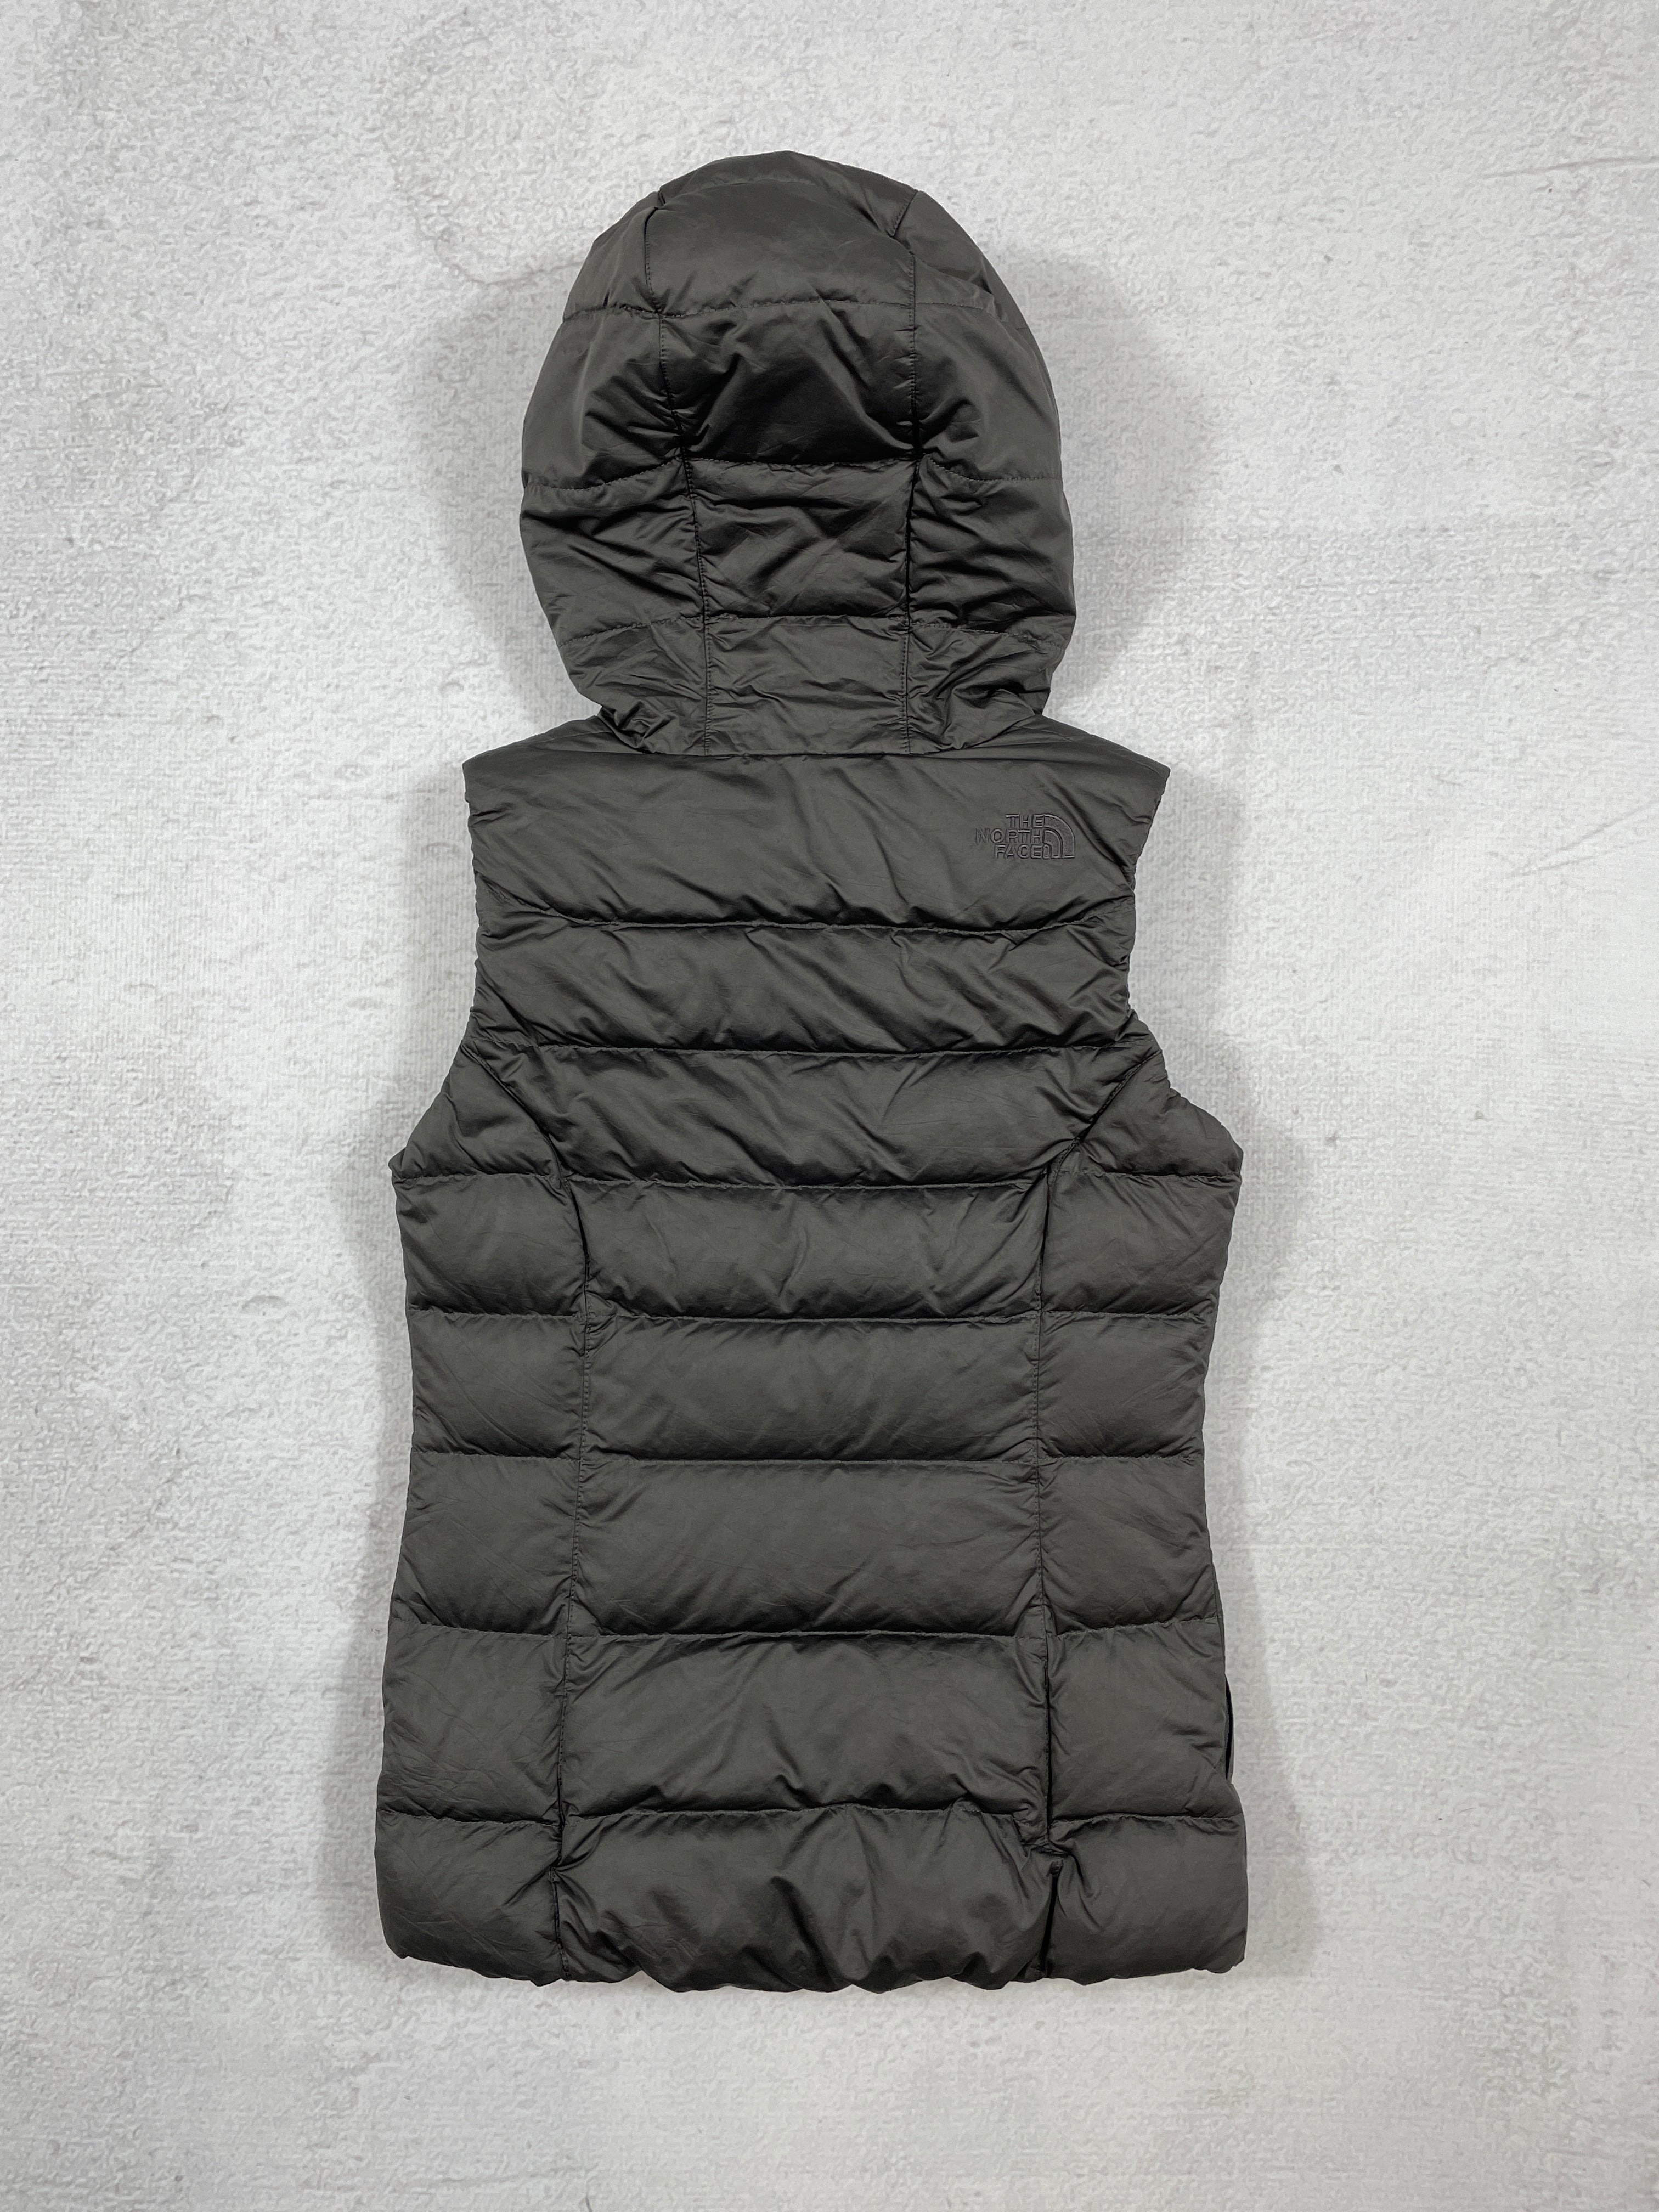 Vintage The North Face 550 Series Insulated Vest - Women's XS